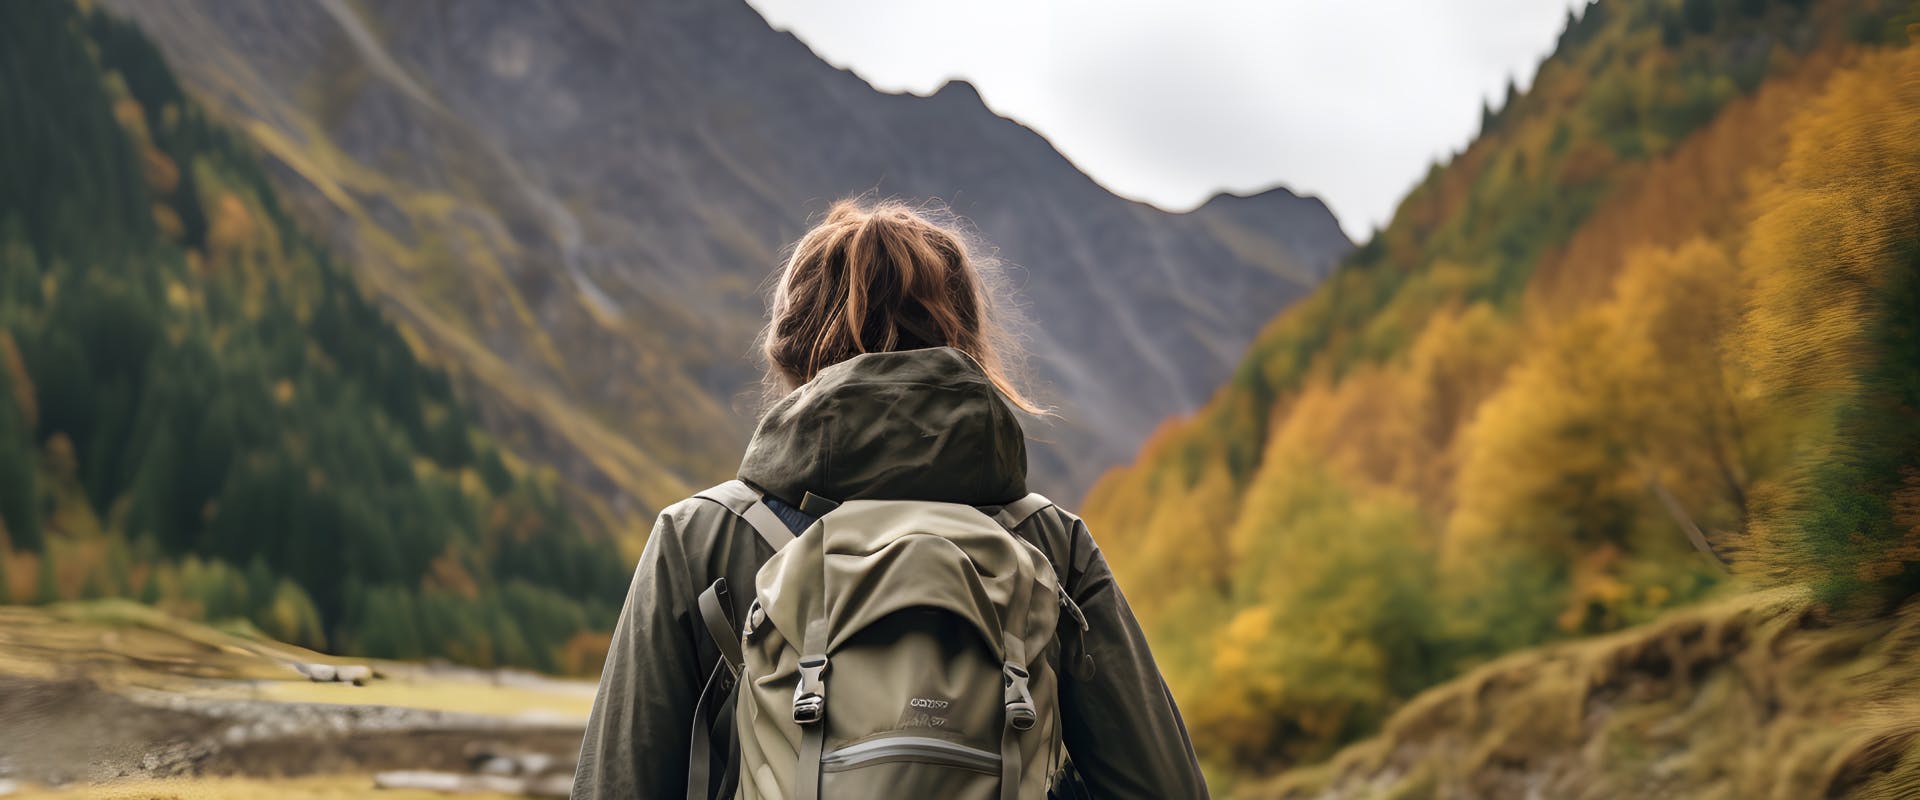 solo female traveler with solo camping gear backpack looking at a mountain valley